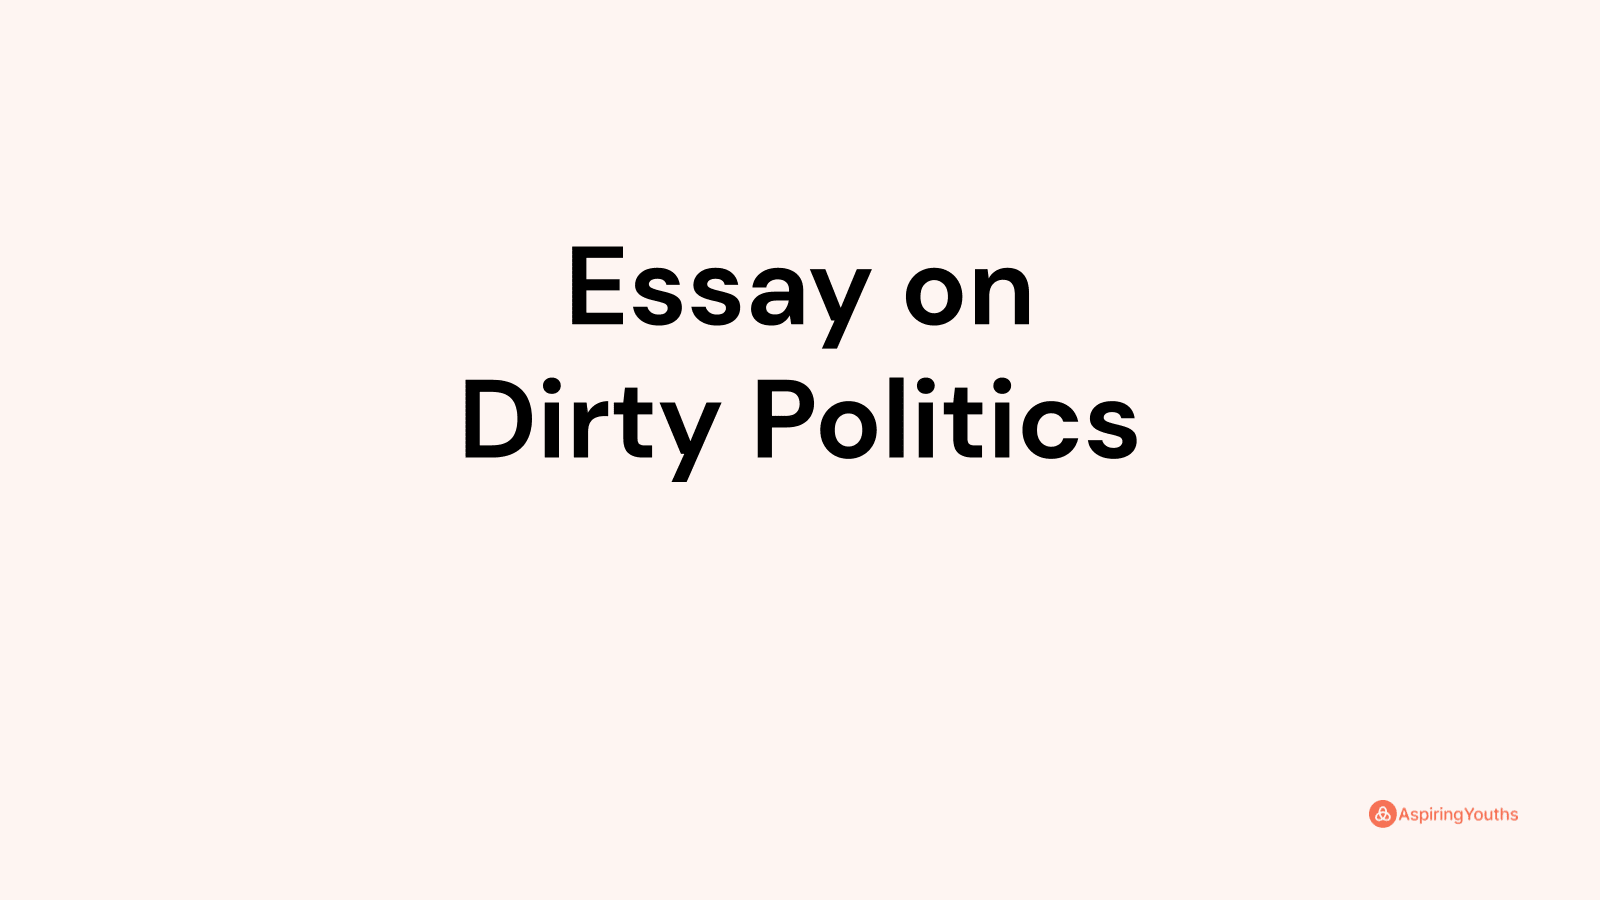 write an essay on politics is a dirty game